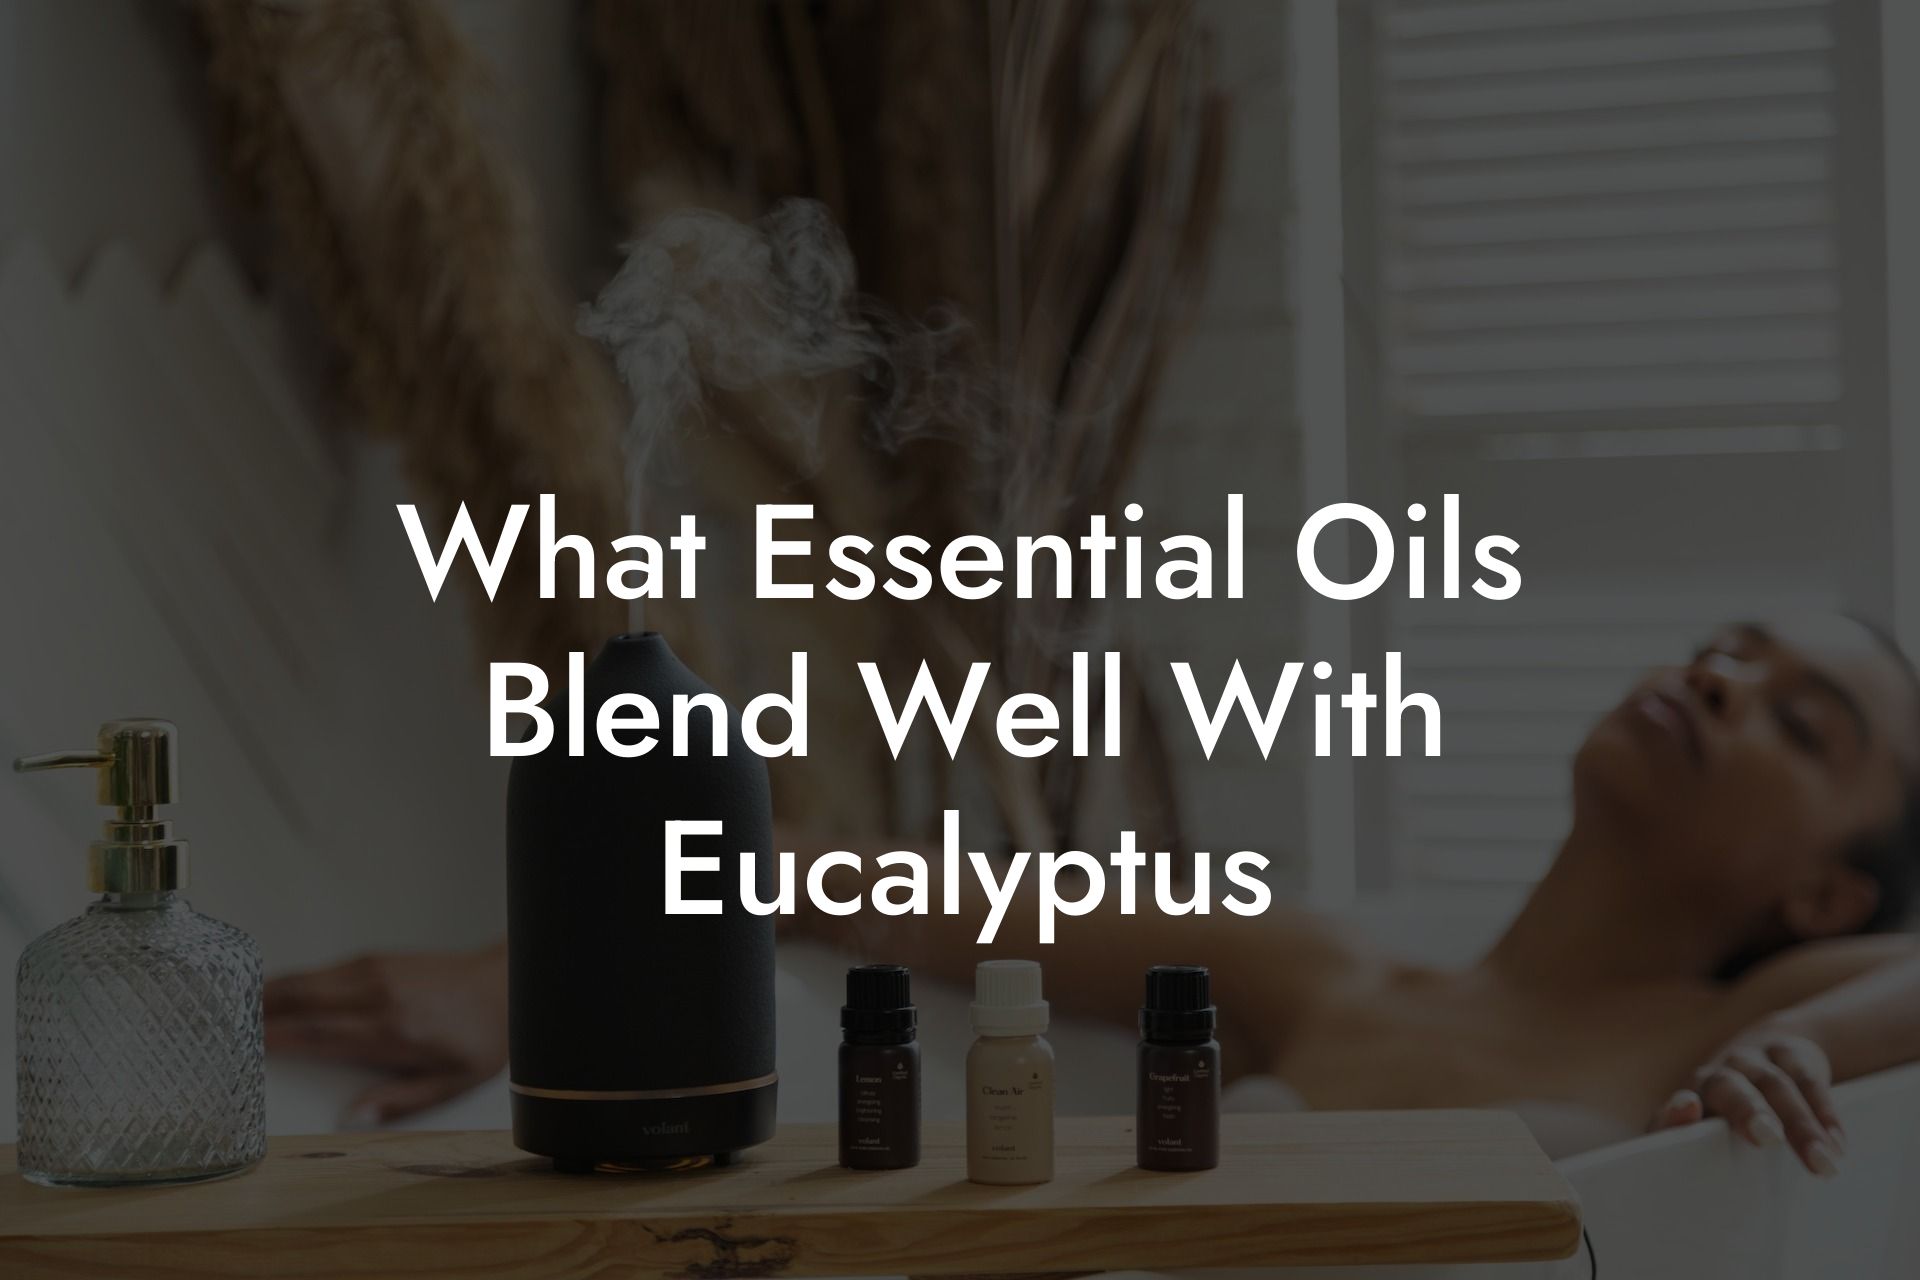 What Essential Oils Blend Well With Eucalyptus